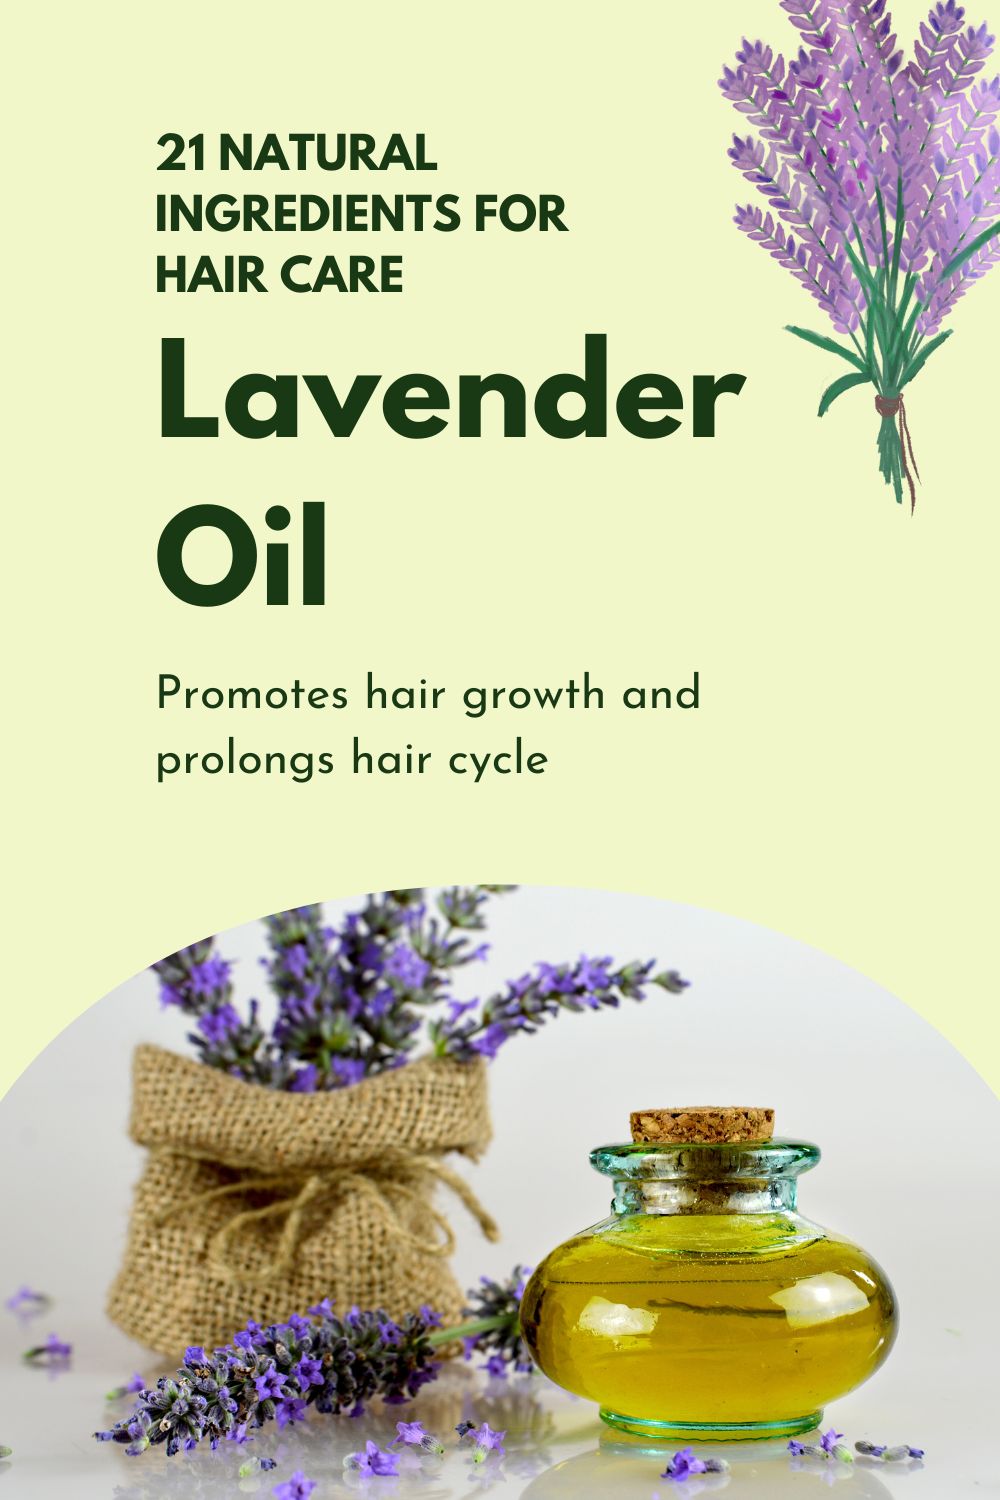 Lavender Oil - Promotes hair growth and prolongs hair cycle